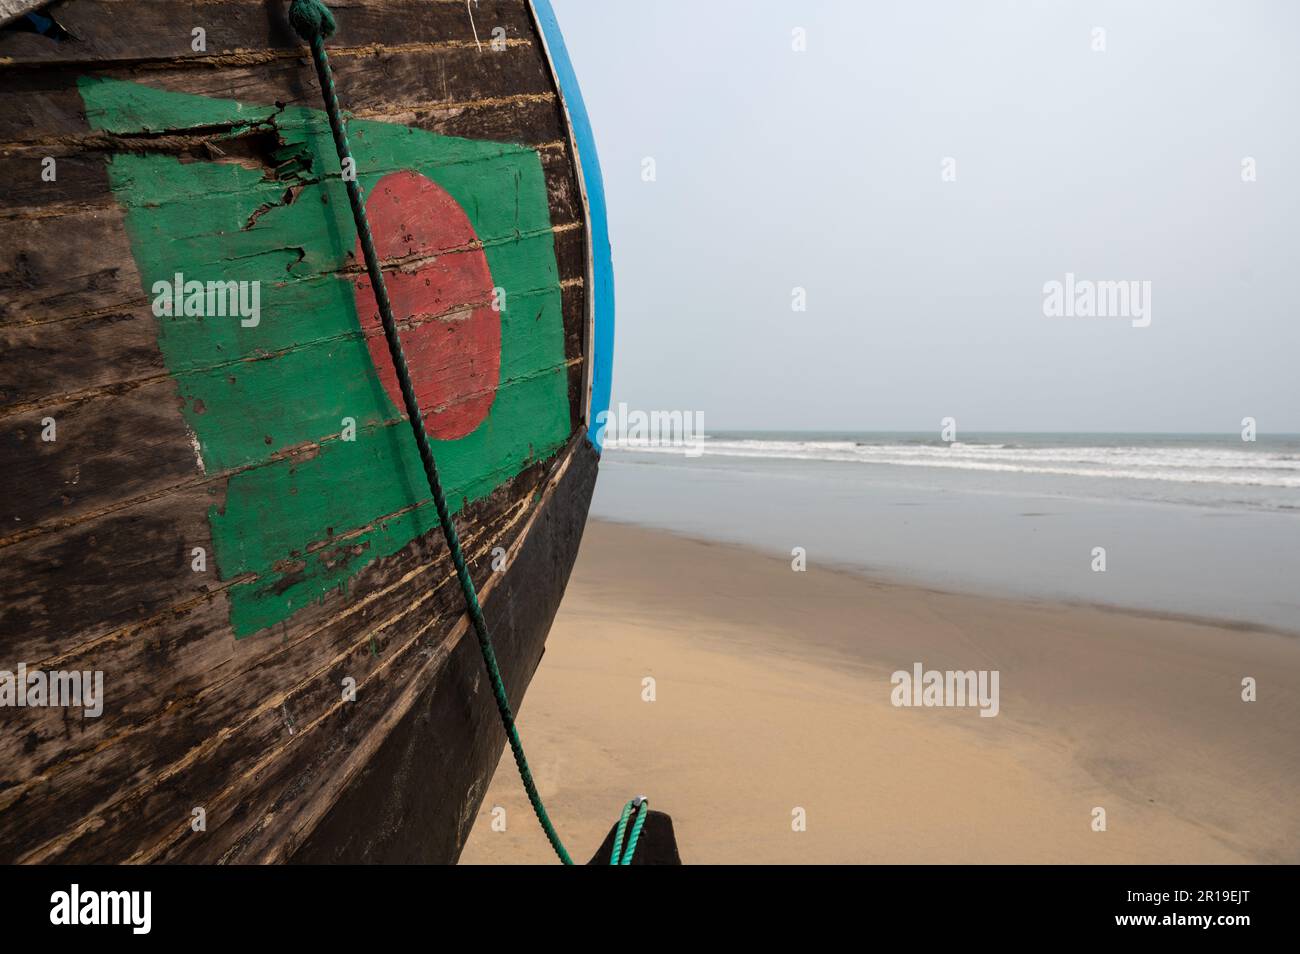 Unique moon shaped fishing boat only found at Cox's Bazar in Bangladesh - home of the world's longest sand beach. Stock Photo